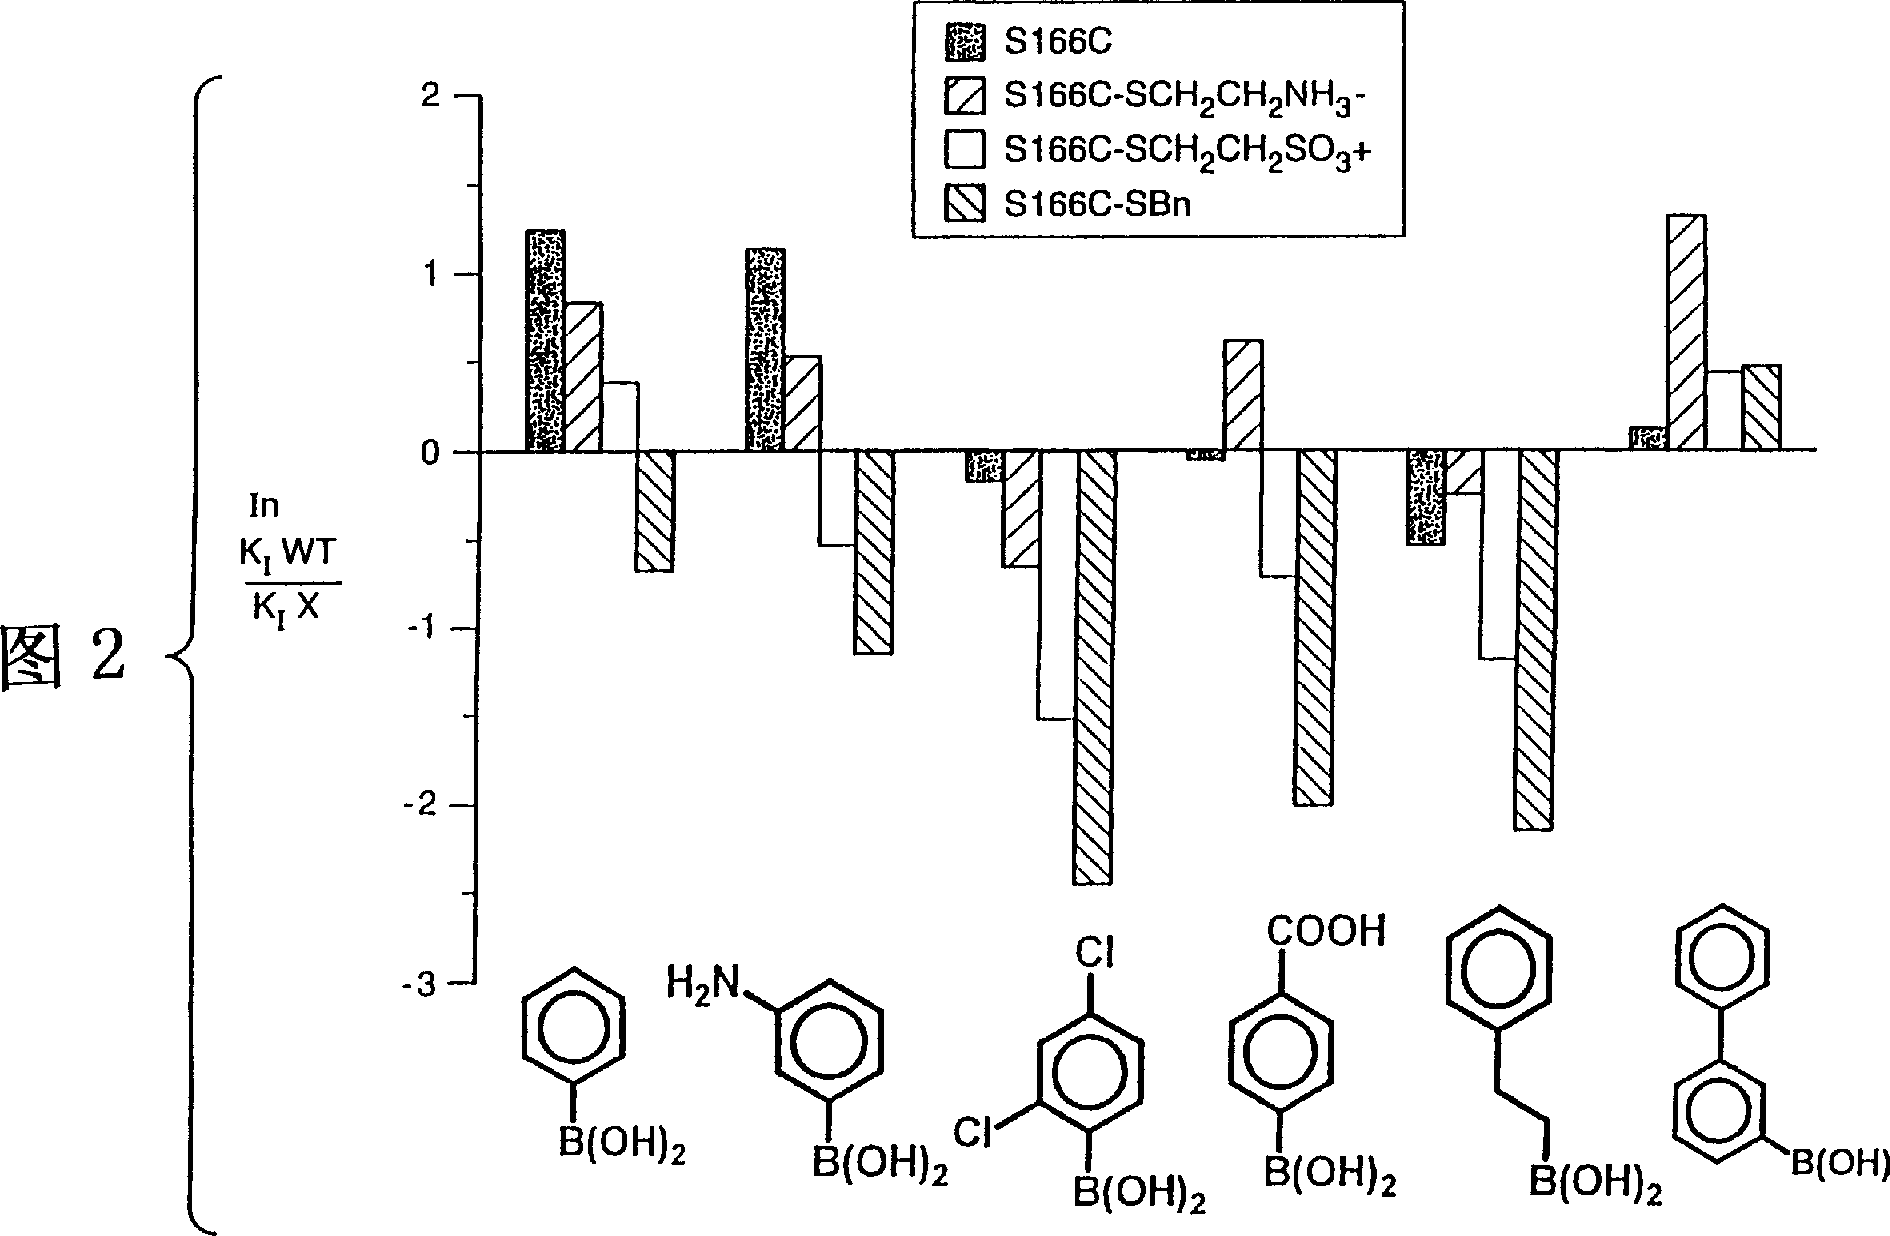 Chemically modified enzymes